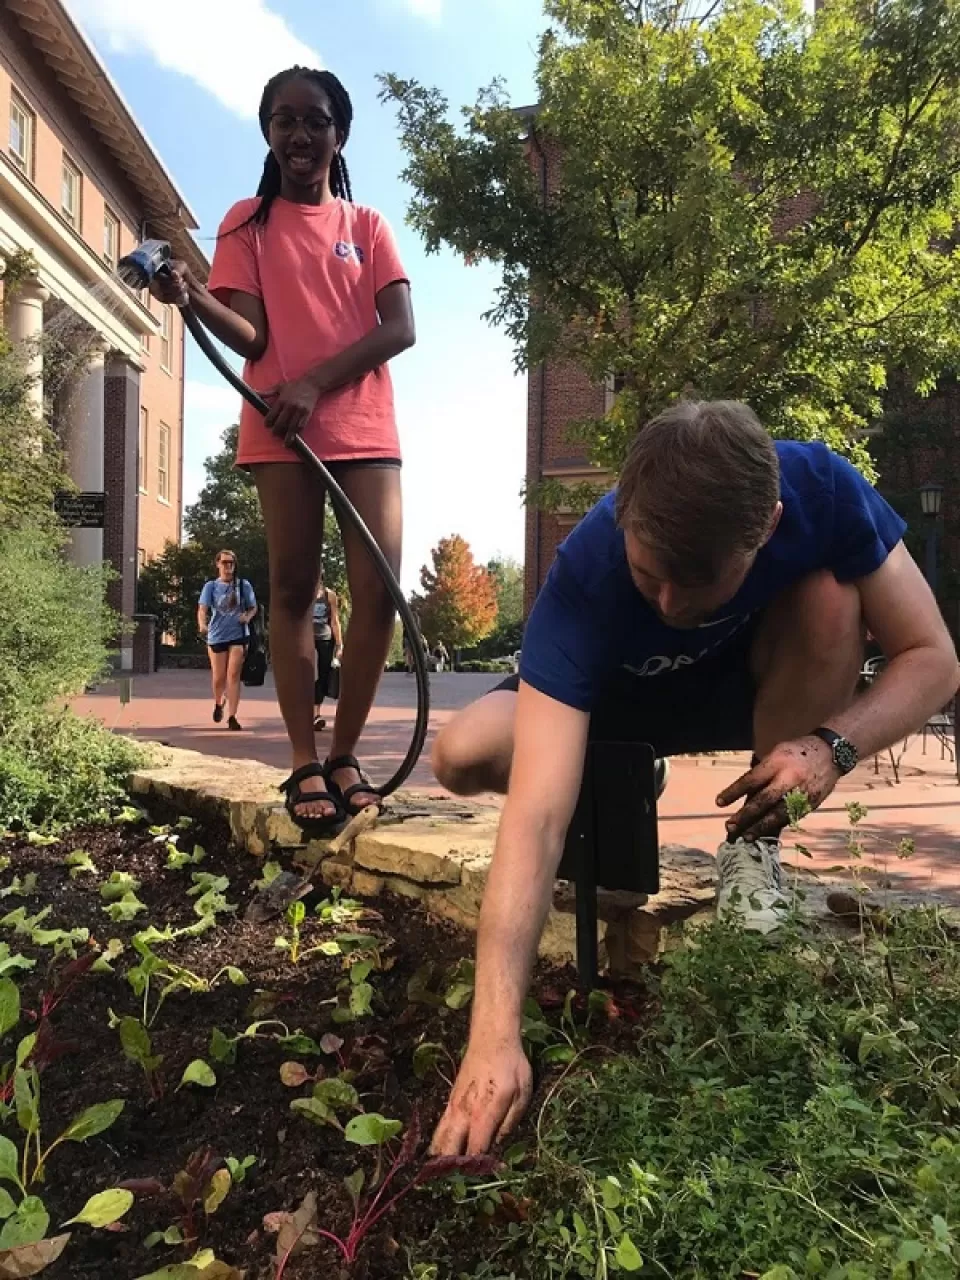 Students from the University of North Carolina care for growing beds as part of North Carolina Botanical Garden’s “Edible Campus UNC” program.